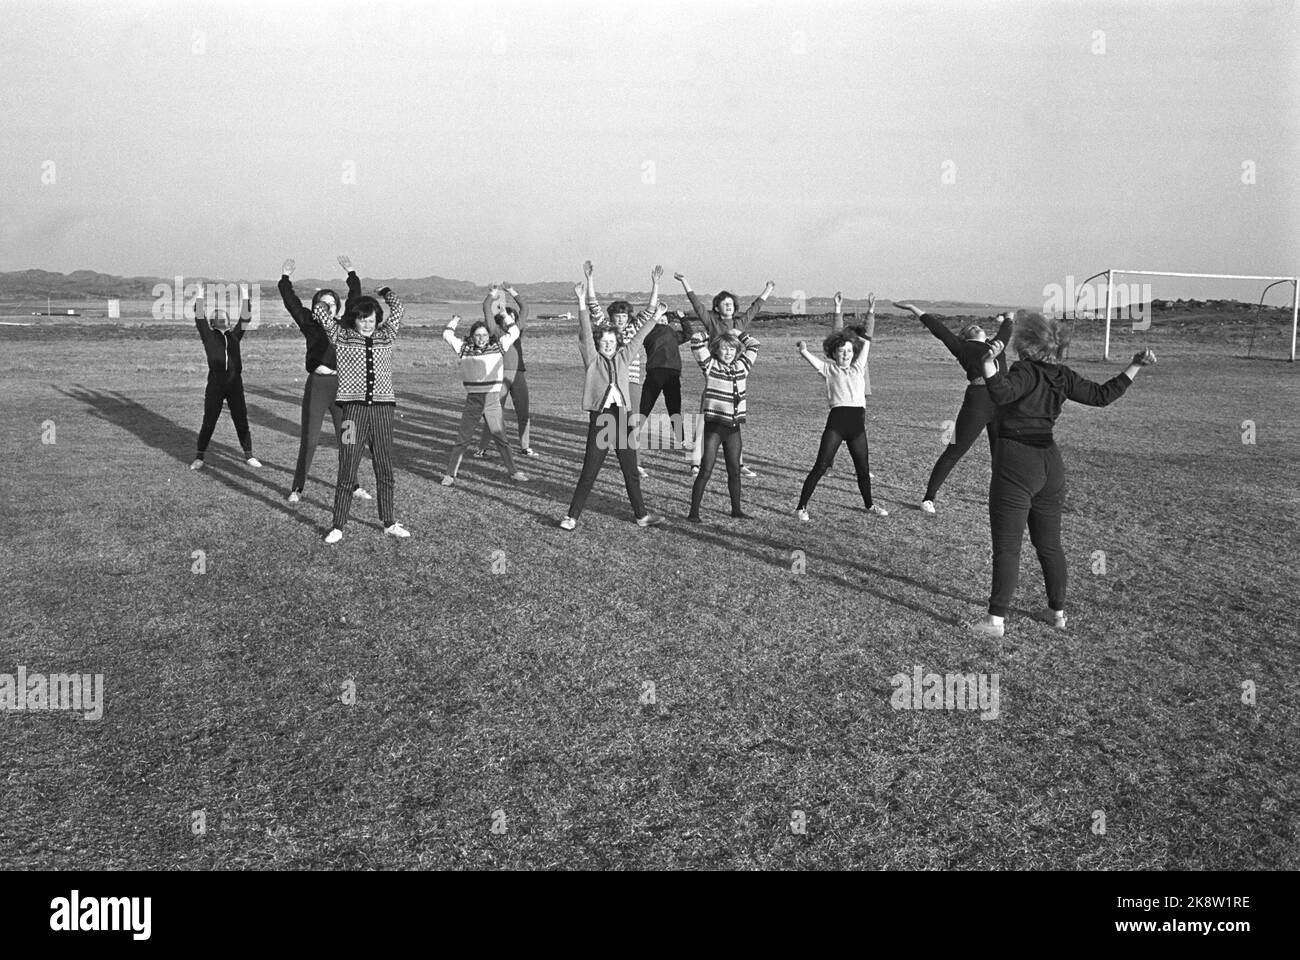 Jæren 19660430. Spring of Jæren. Here the handball girls in Brusand sports teams who have outdoor training in fresh southeast wind. Photo: Storløkken and Aaserud Current / NTB Stock Photo